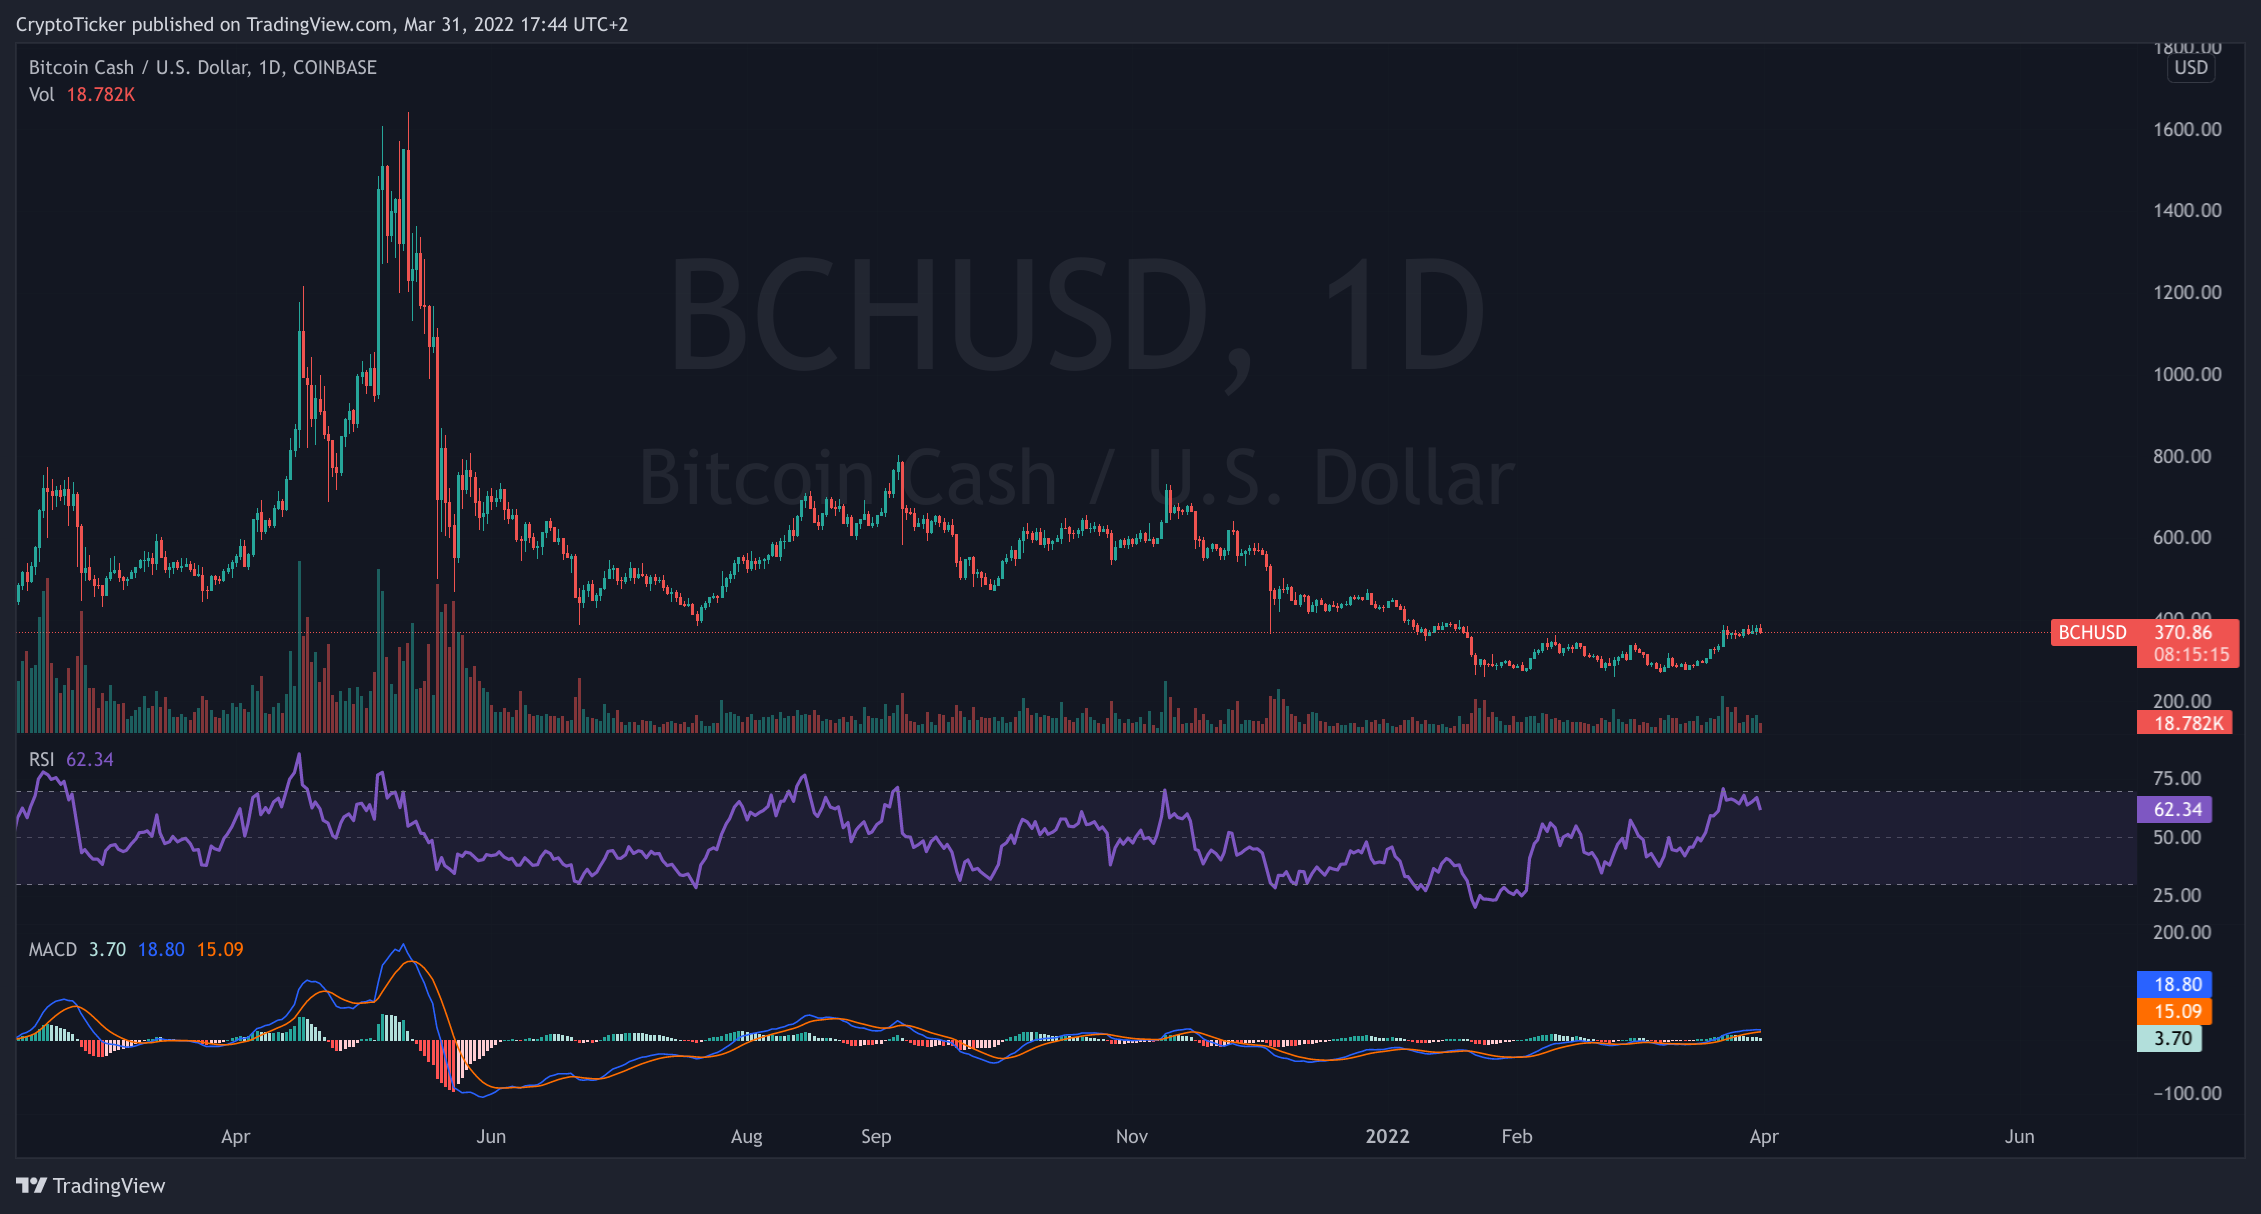 BCH/USD 1-day chart showing the crash in BCH prices